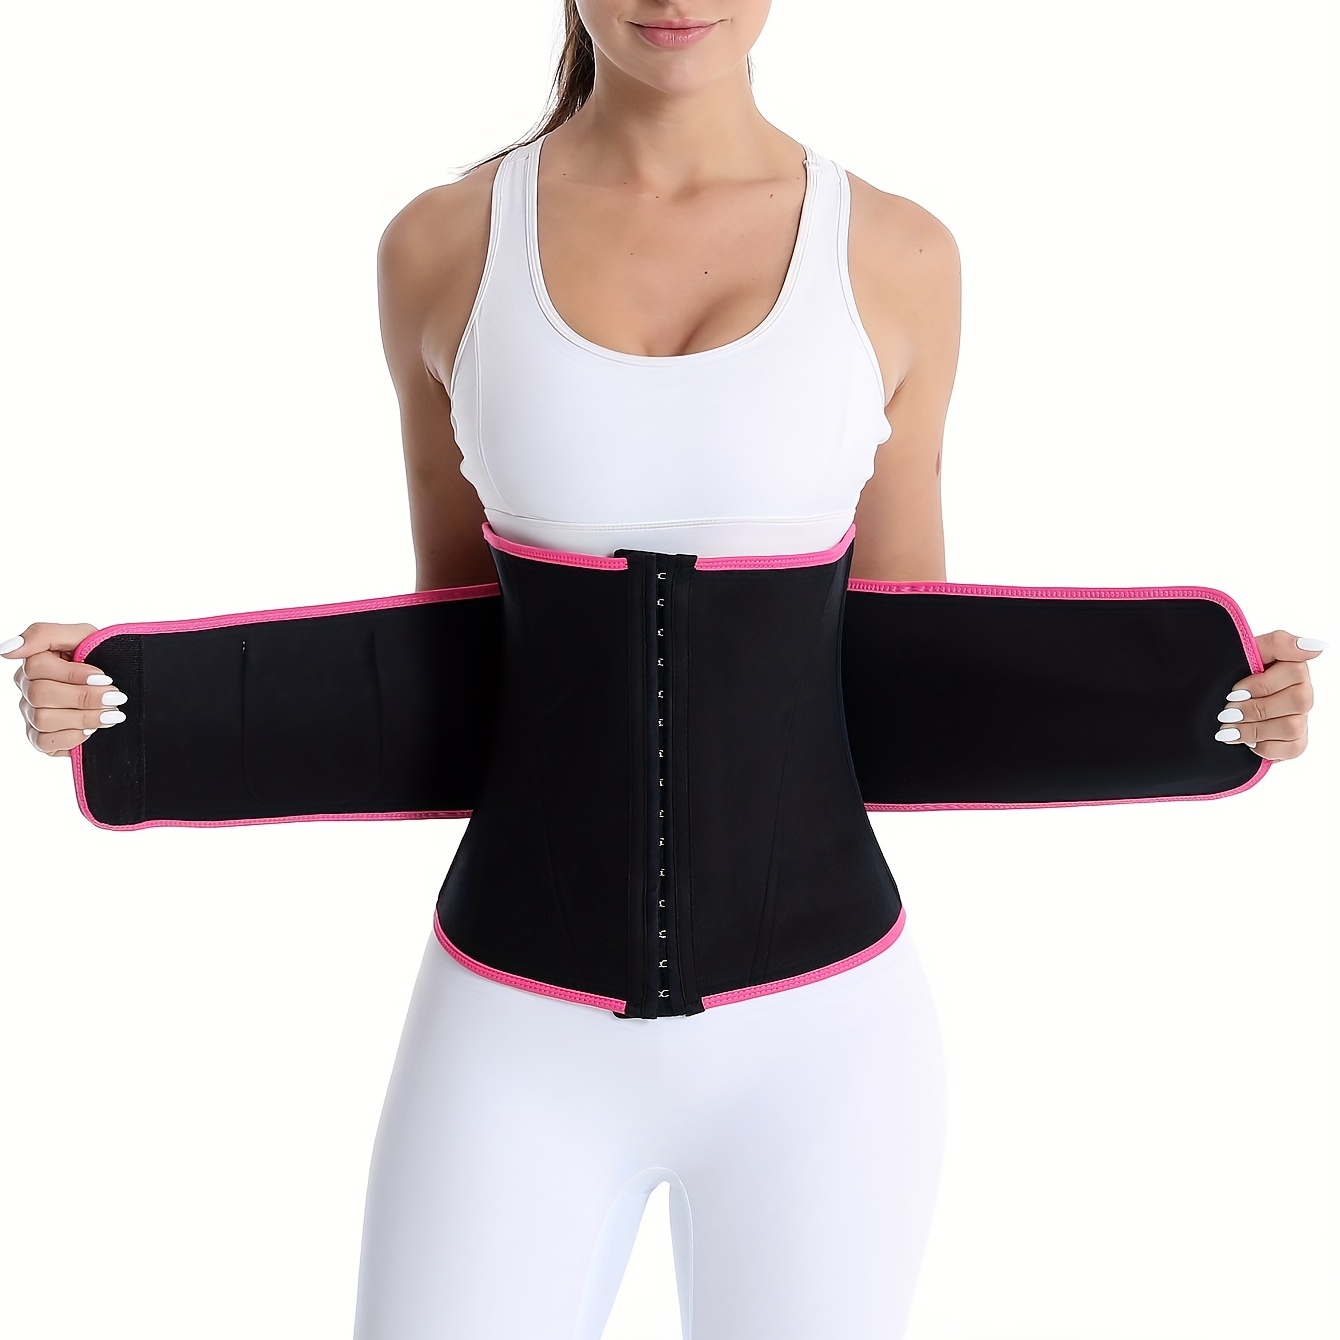 Sweat Waist Trimmer For Women, Waist Trainer Sweat Band For Fitness Running  Shaping